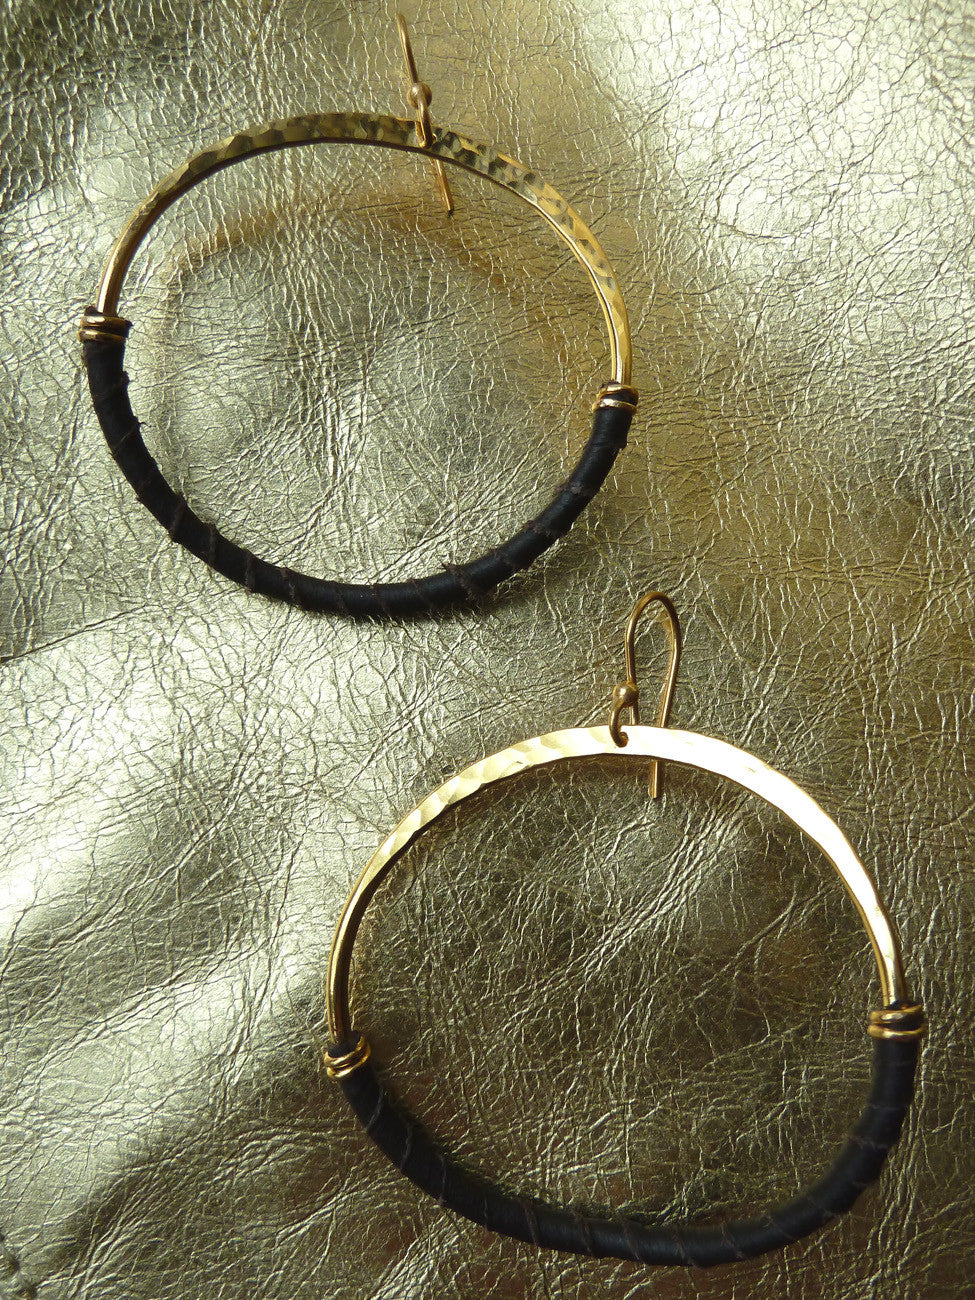 HOOP EARRINGS HAMMERED BRASS LEATHER SMALL LARGE